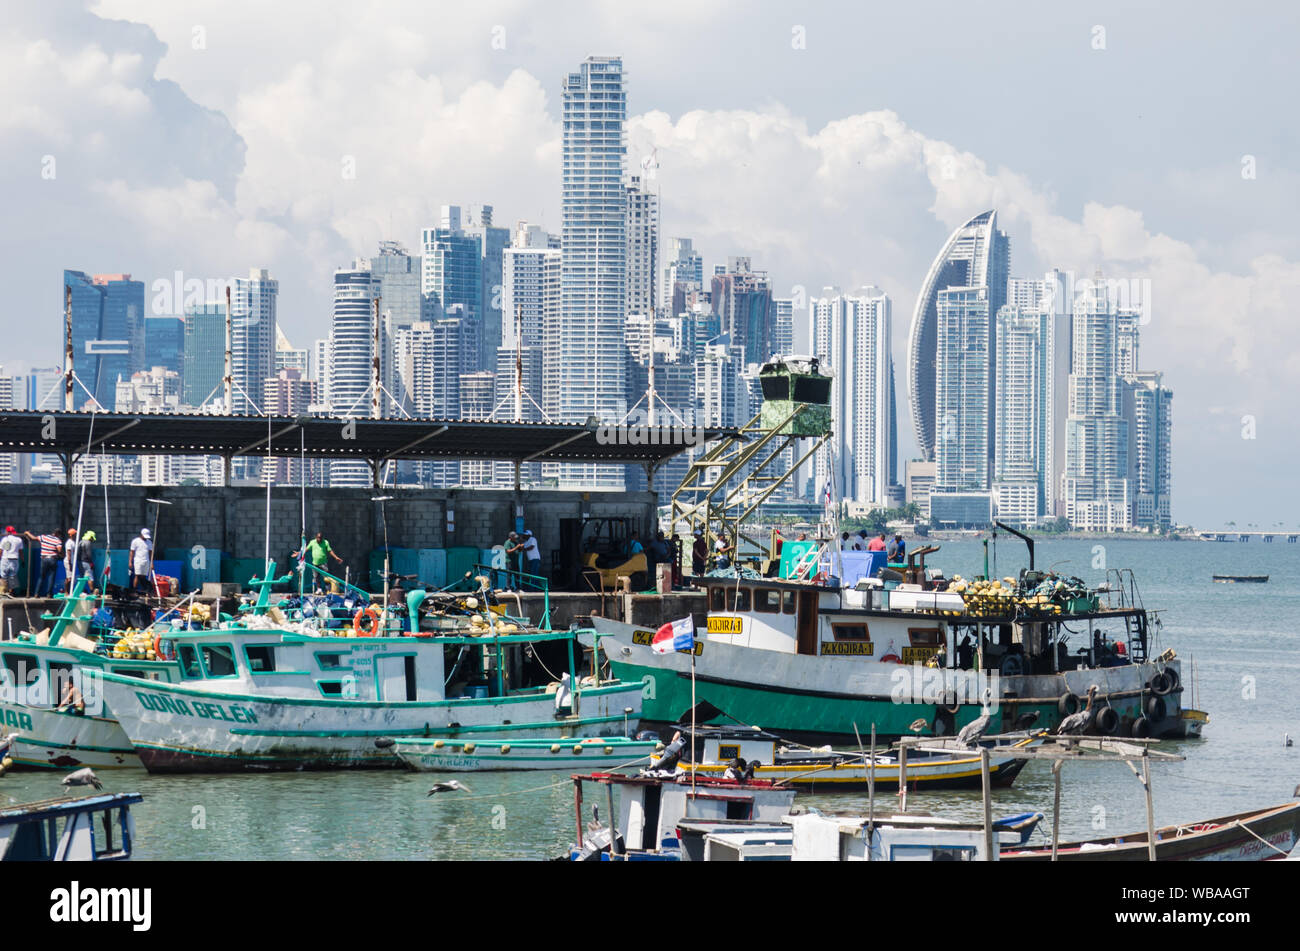 Scene of daily life in the public pier next to the Seafood Market in Panama City. Stock Photo